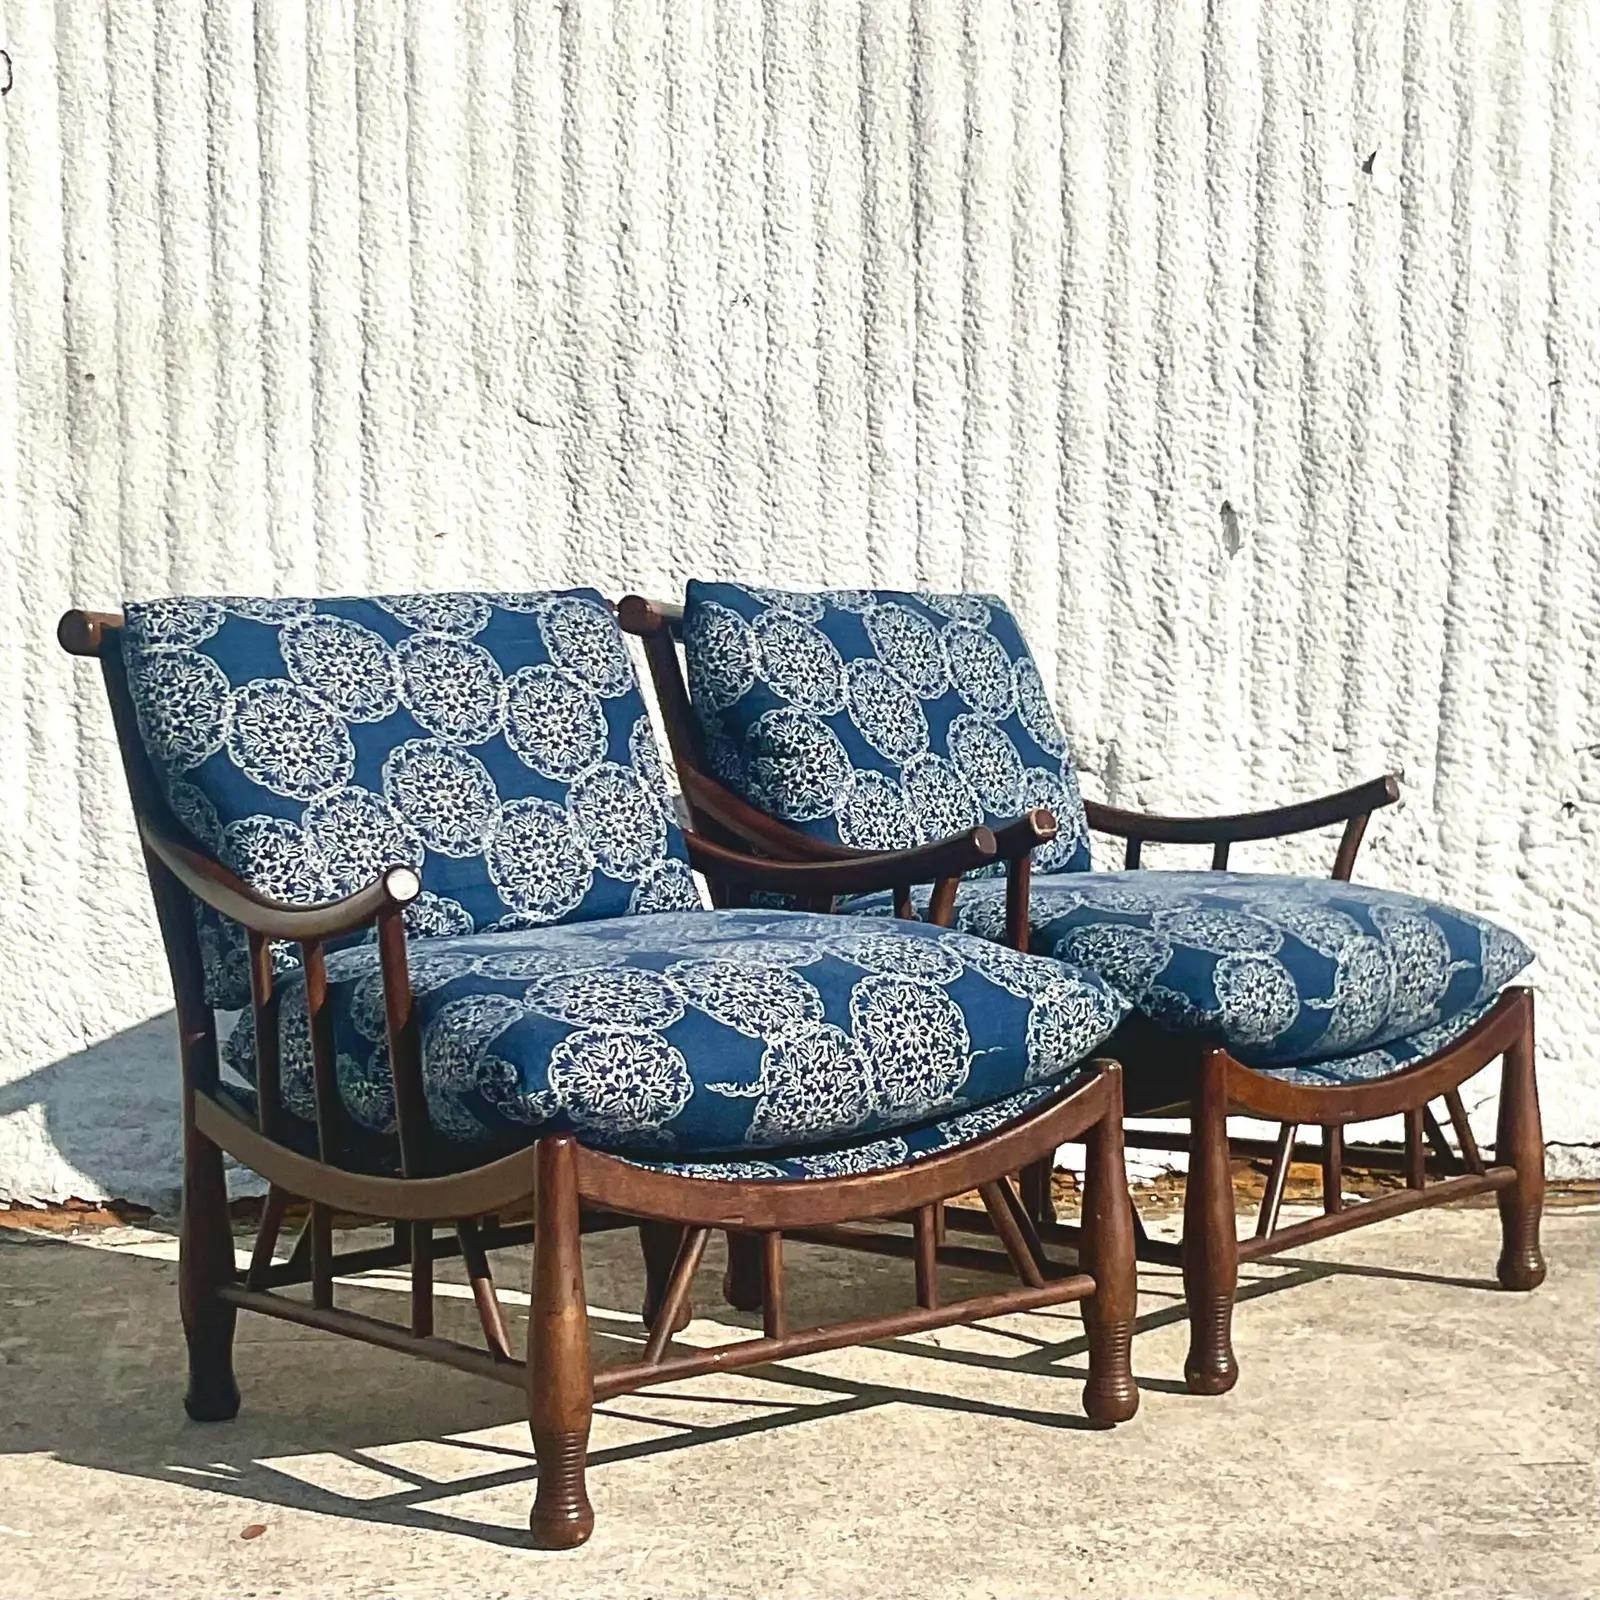 A fantastic pair of vintage Boho lounge chairs. Made by the legendary Pearson group. A chic Thebes shape with gorgeous over dyed cushions. Unmarked.